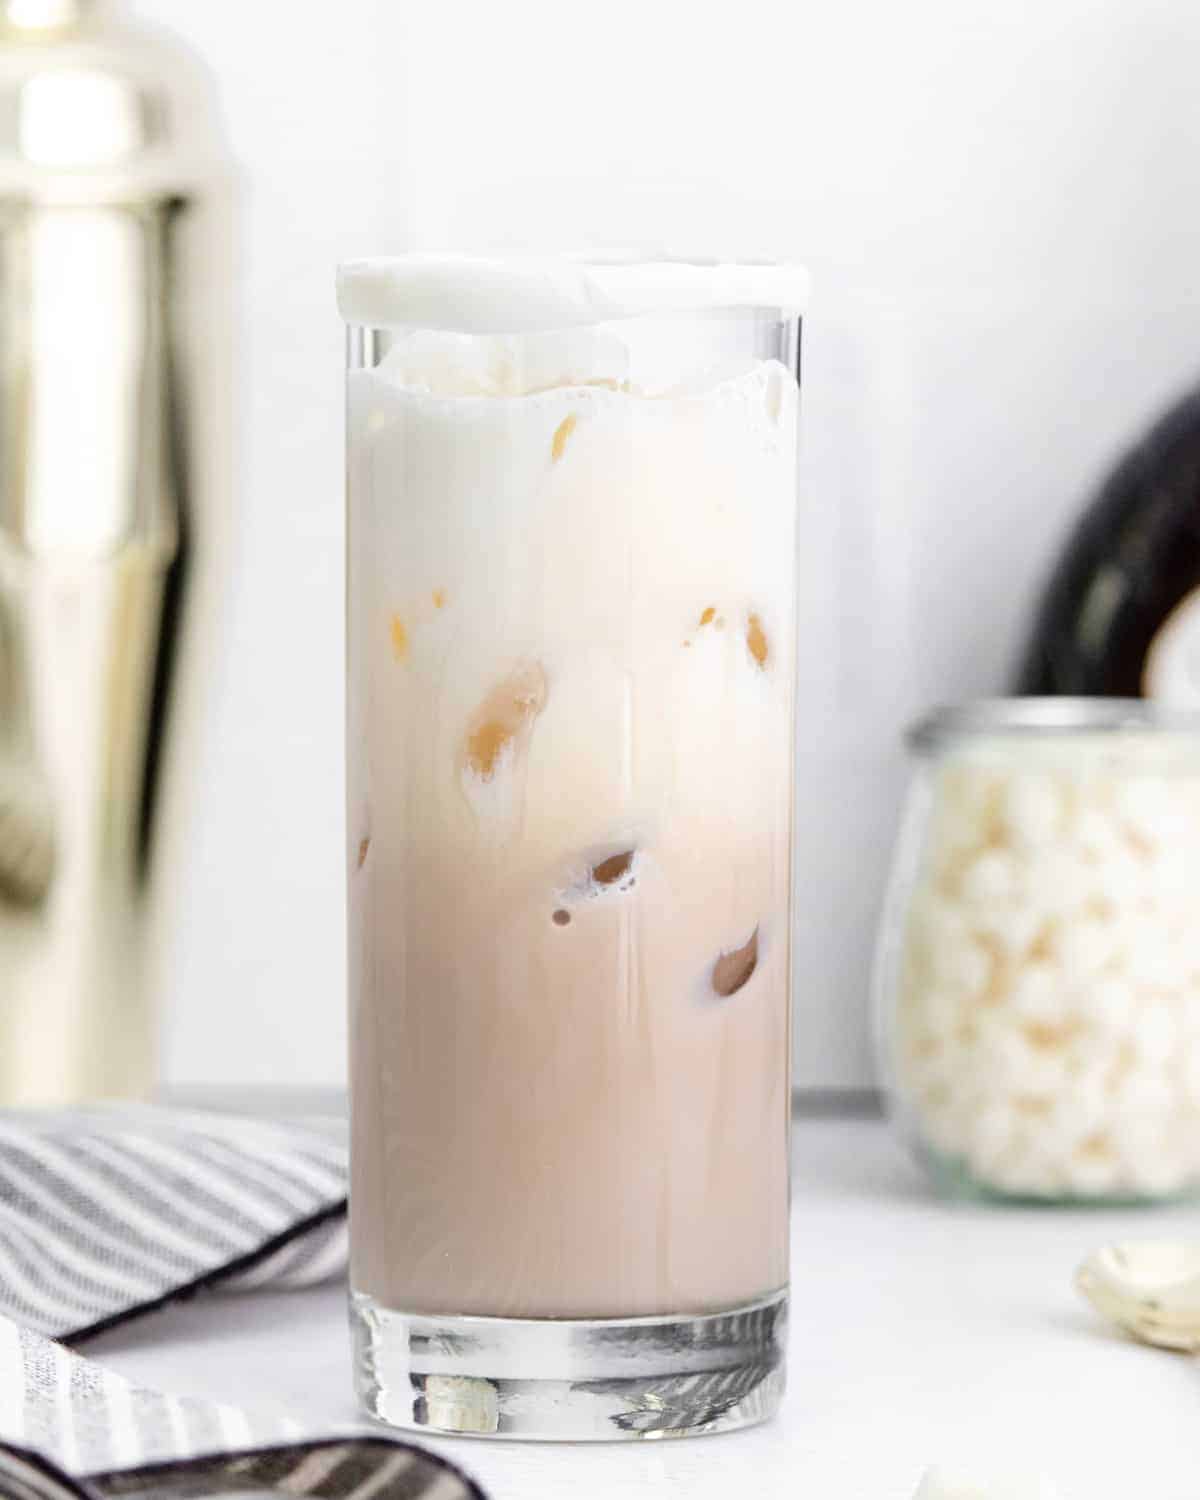 Drink with a light brown layer, a light white layer, and ice.